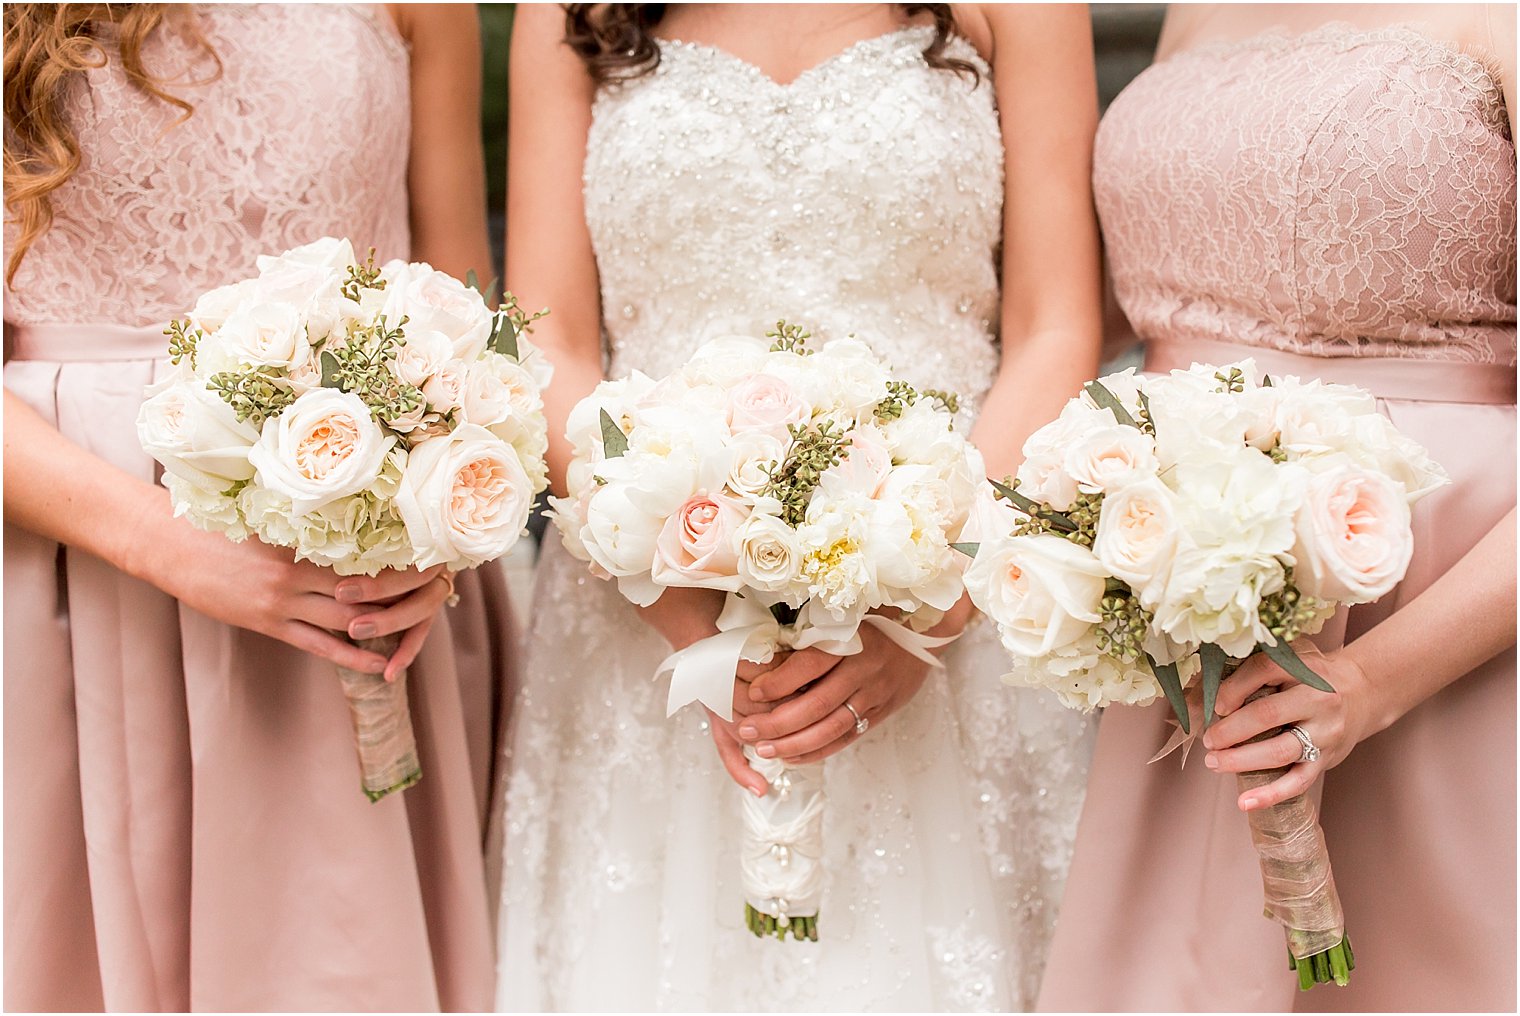 Bouquets by AW Flowers | Photo by Idalia Photography